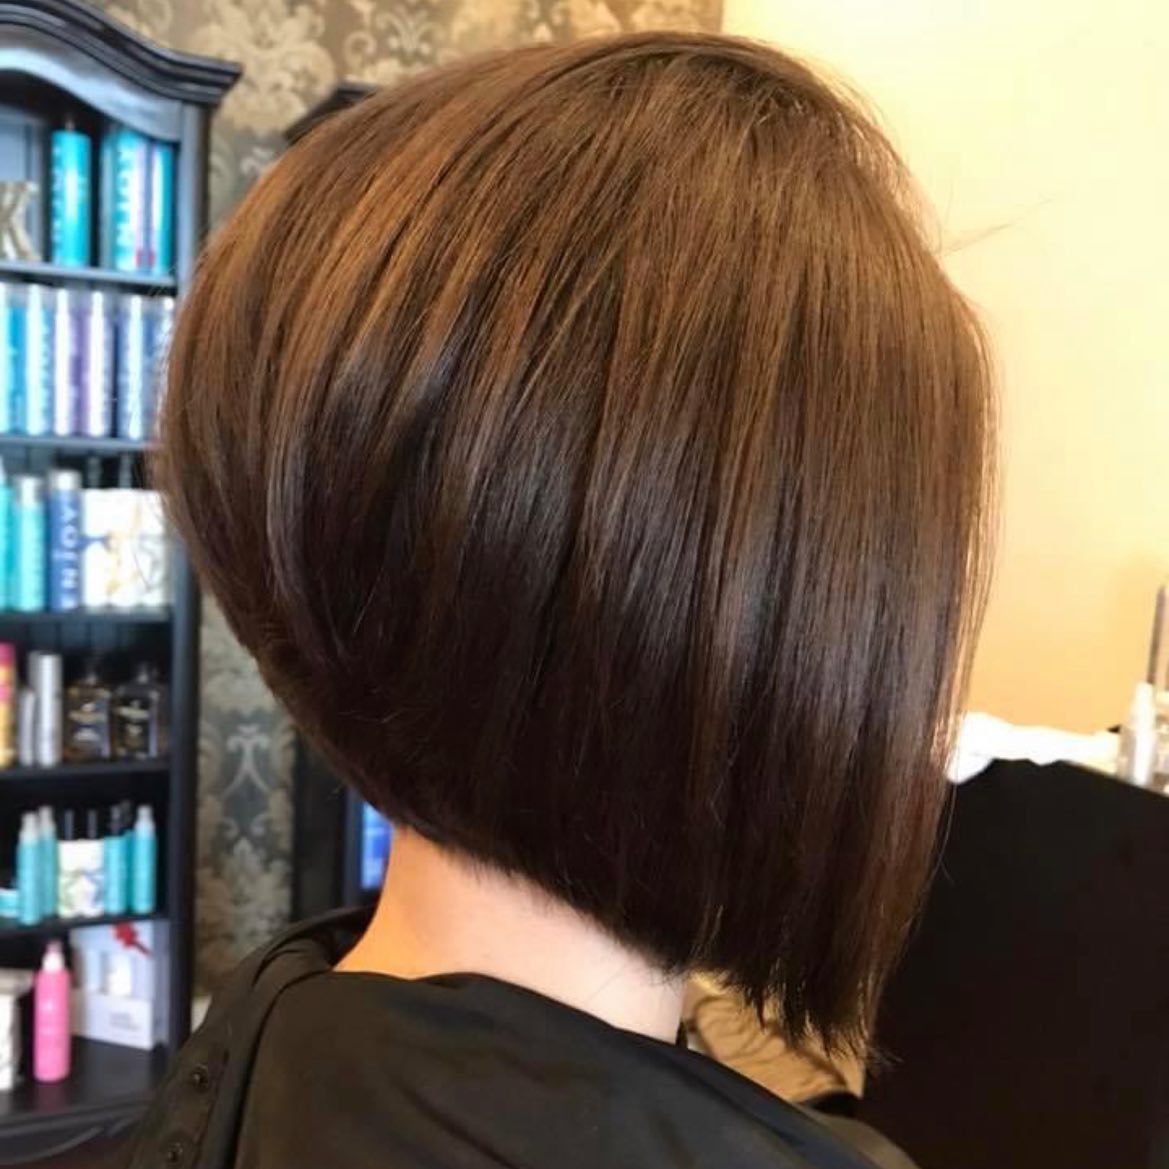 Stacked Bob 53 Long stacked bob | Medium length stacked bob | Pictures of stacked bob haircuts front and back Stacked Bob Hairstyles for Women